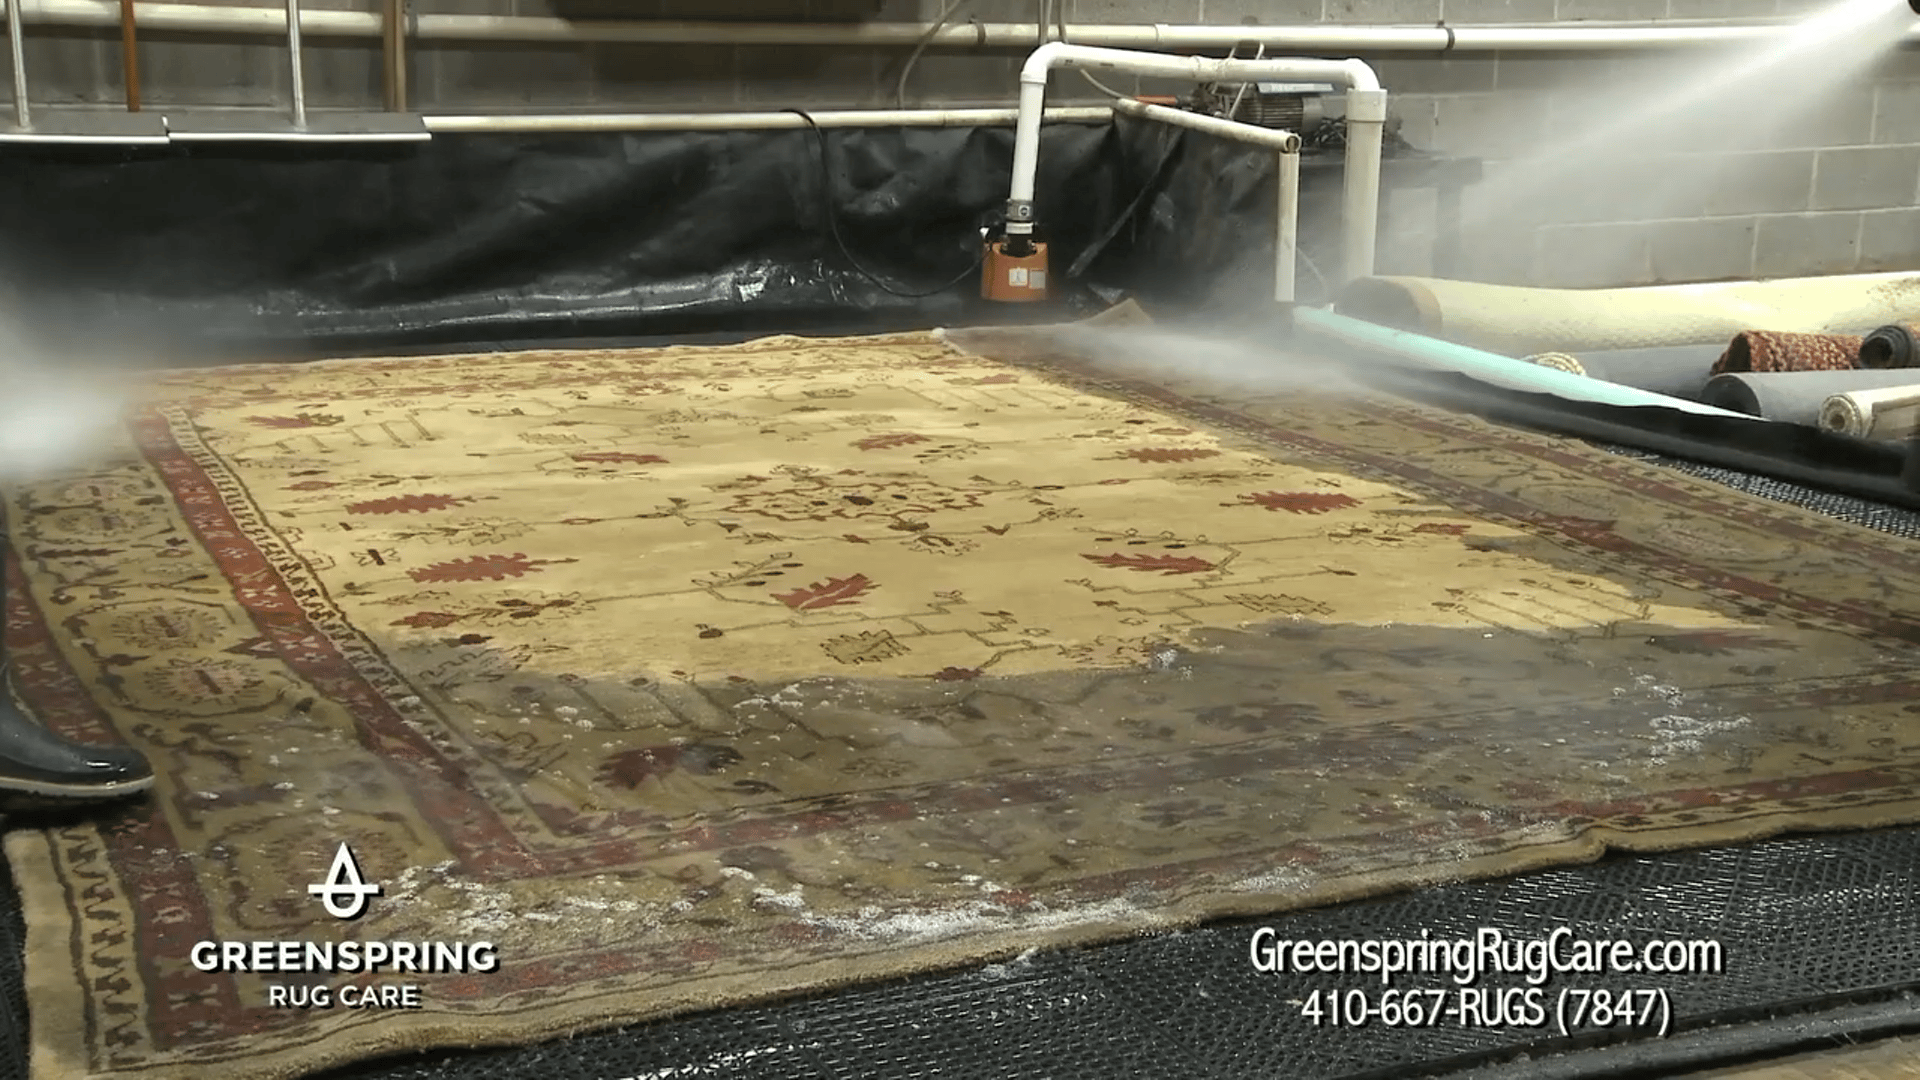 Greenspring Rug Care Cleaning Repairs Restoration More